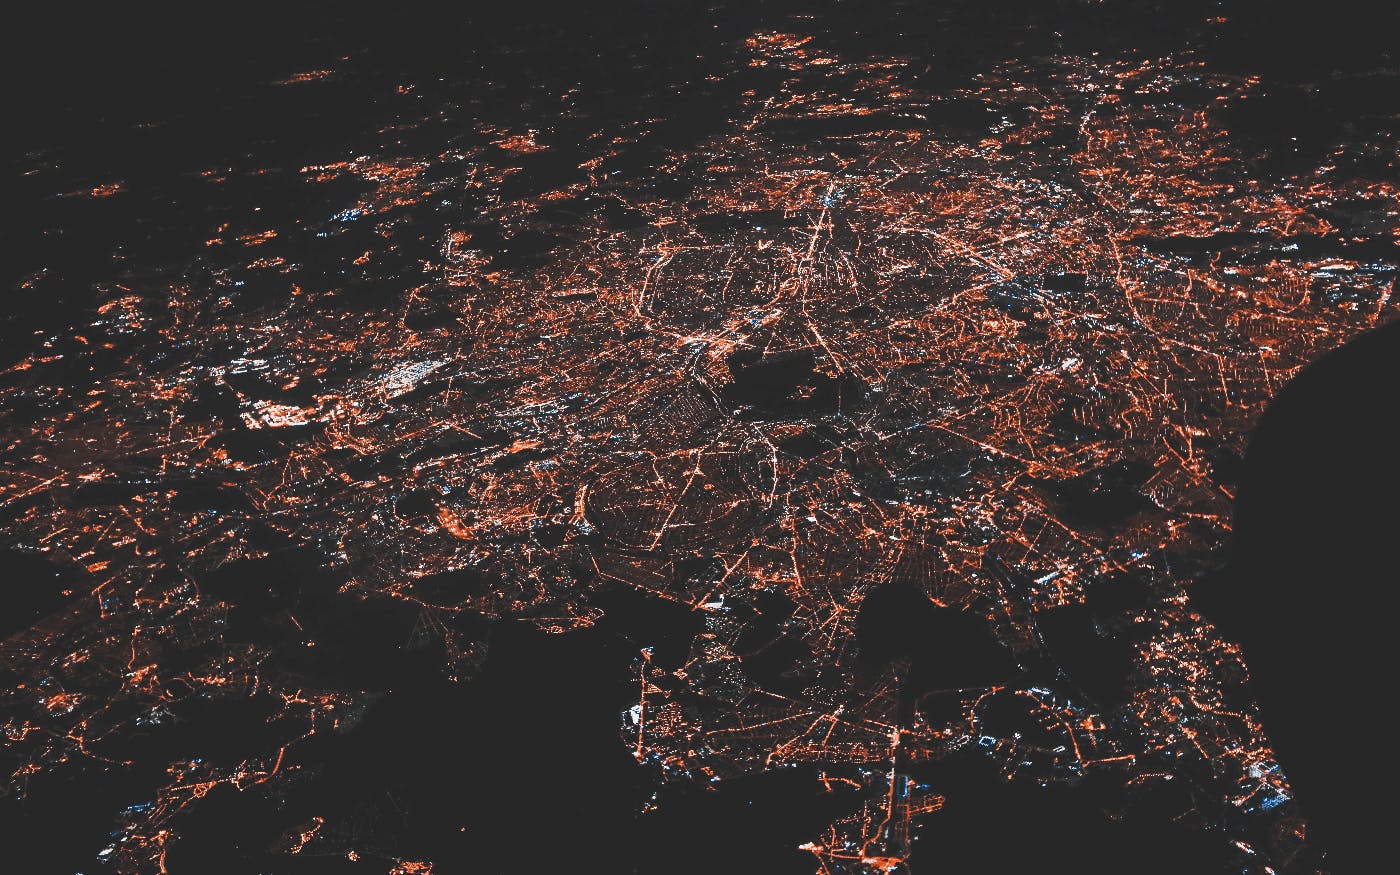 Aerial photo onf a city at night lit up